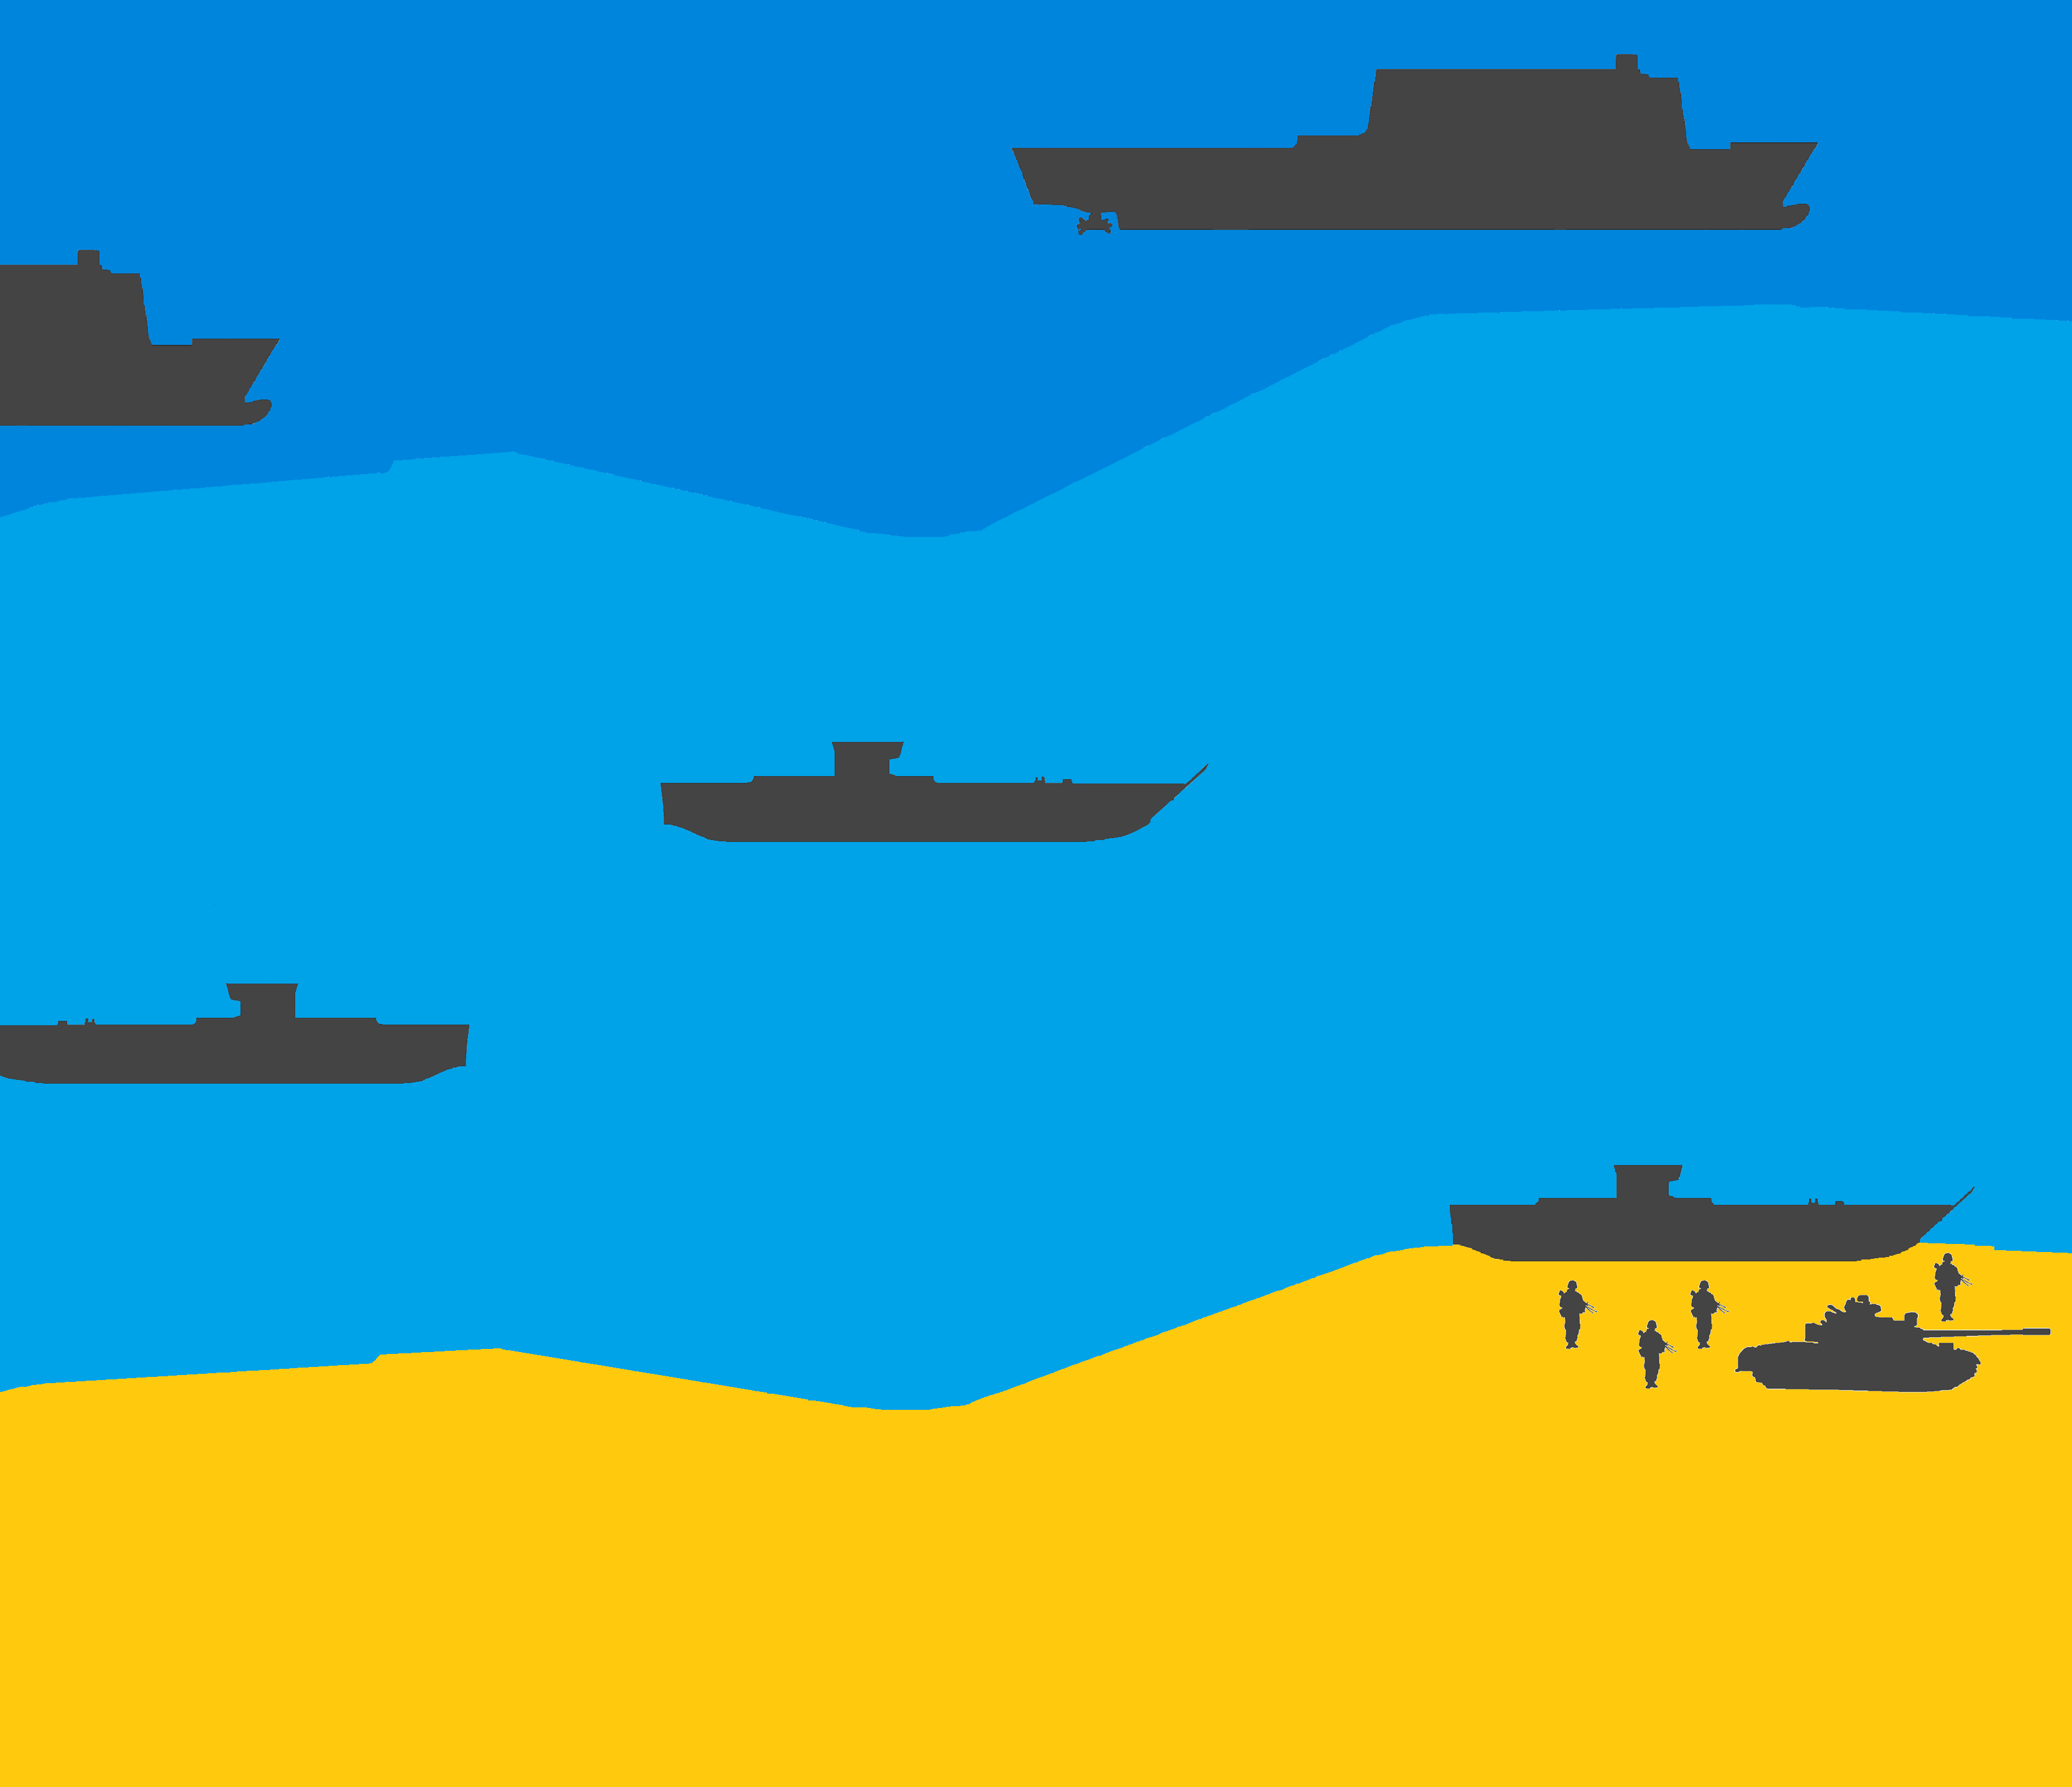 A diagram explaining the Ship-to-Shore problem by showing military ships on the sea and units and military equipment on land